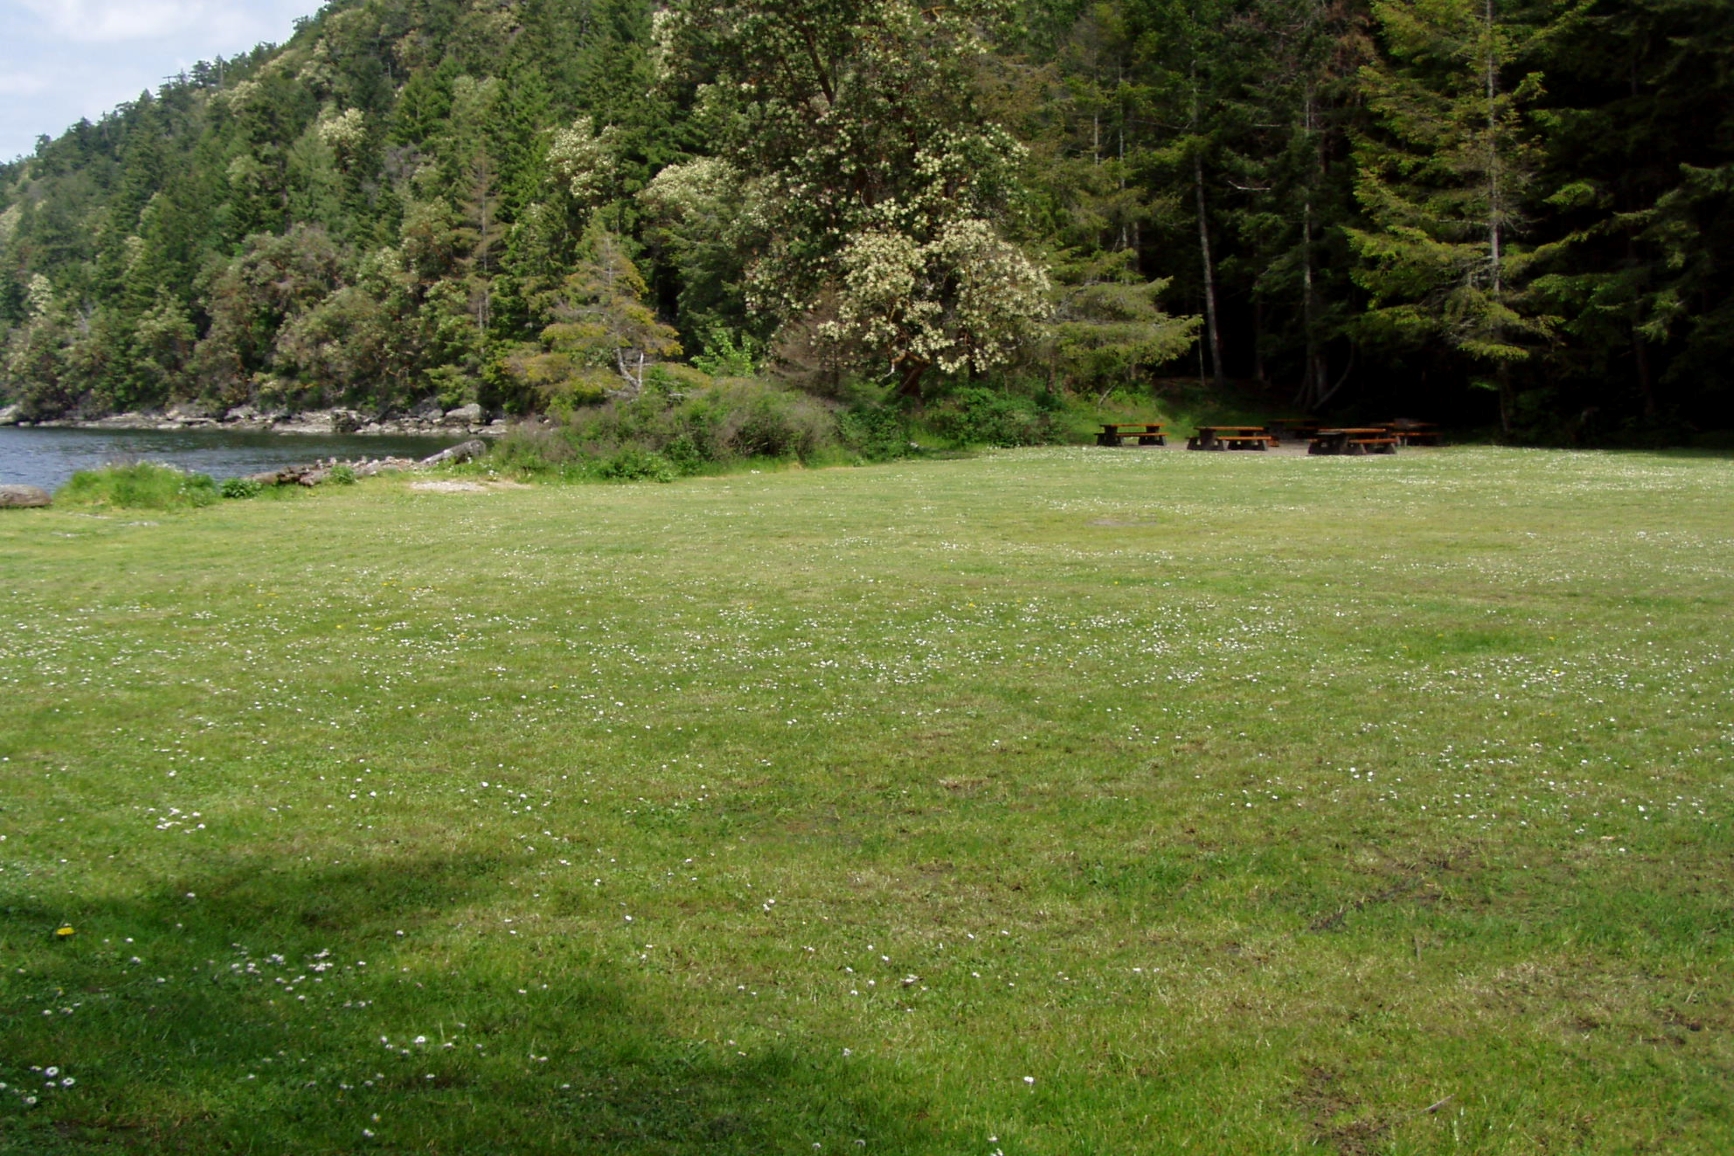 View of grassy area and picnic tables